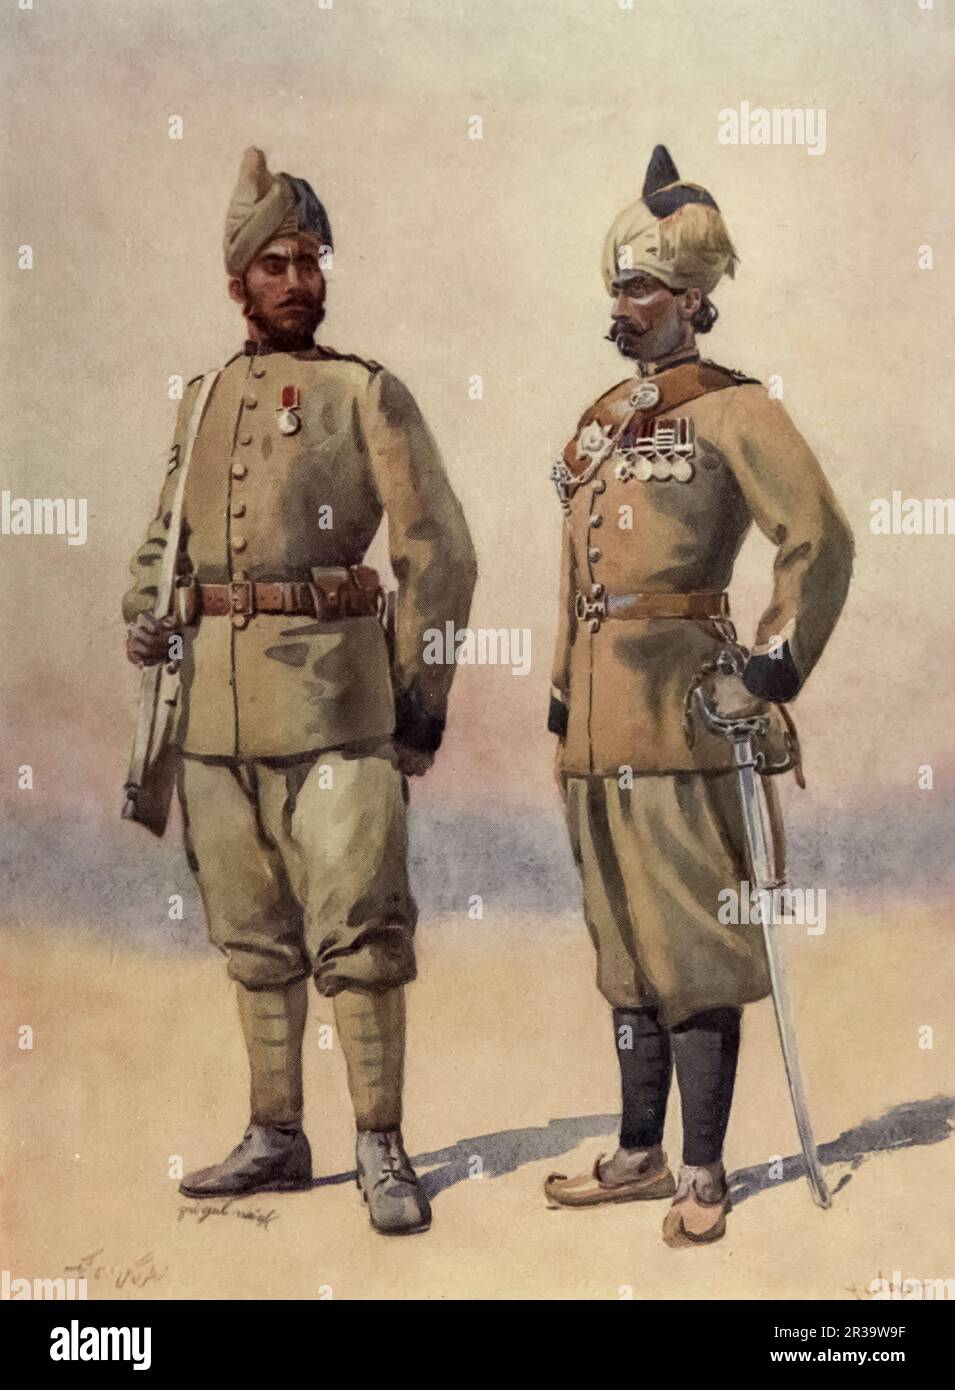 Frontier Force. 57th Wilde's Rifles. 53rde Sikhs (Subadar / Sagri Khattak). painted by Major Alfred Crowdy Lovett, (1862-1919) from the book ' The armies of India ' by Major George Fletcher MacMunn, (1869-1952) Publication date 1911 Publisher London, Adam and Charles Black Stock Photo